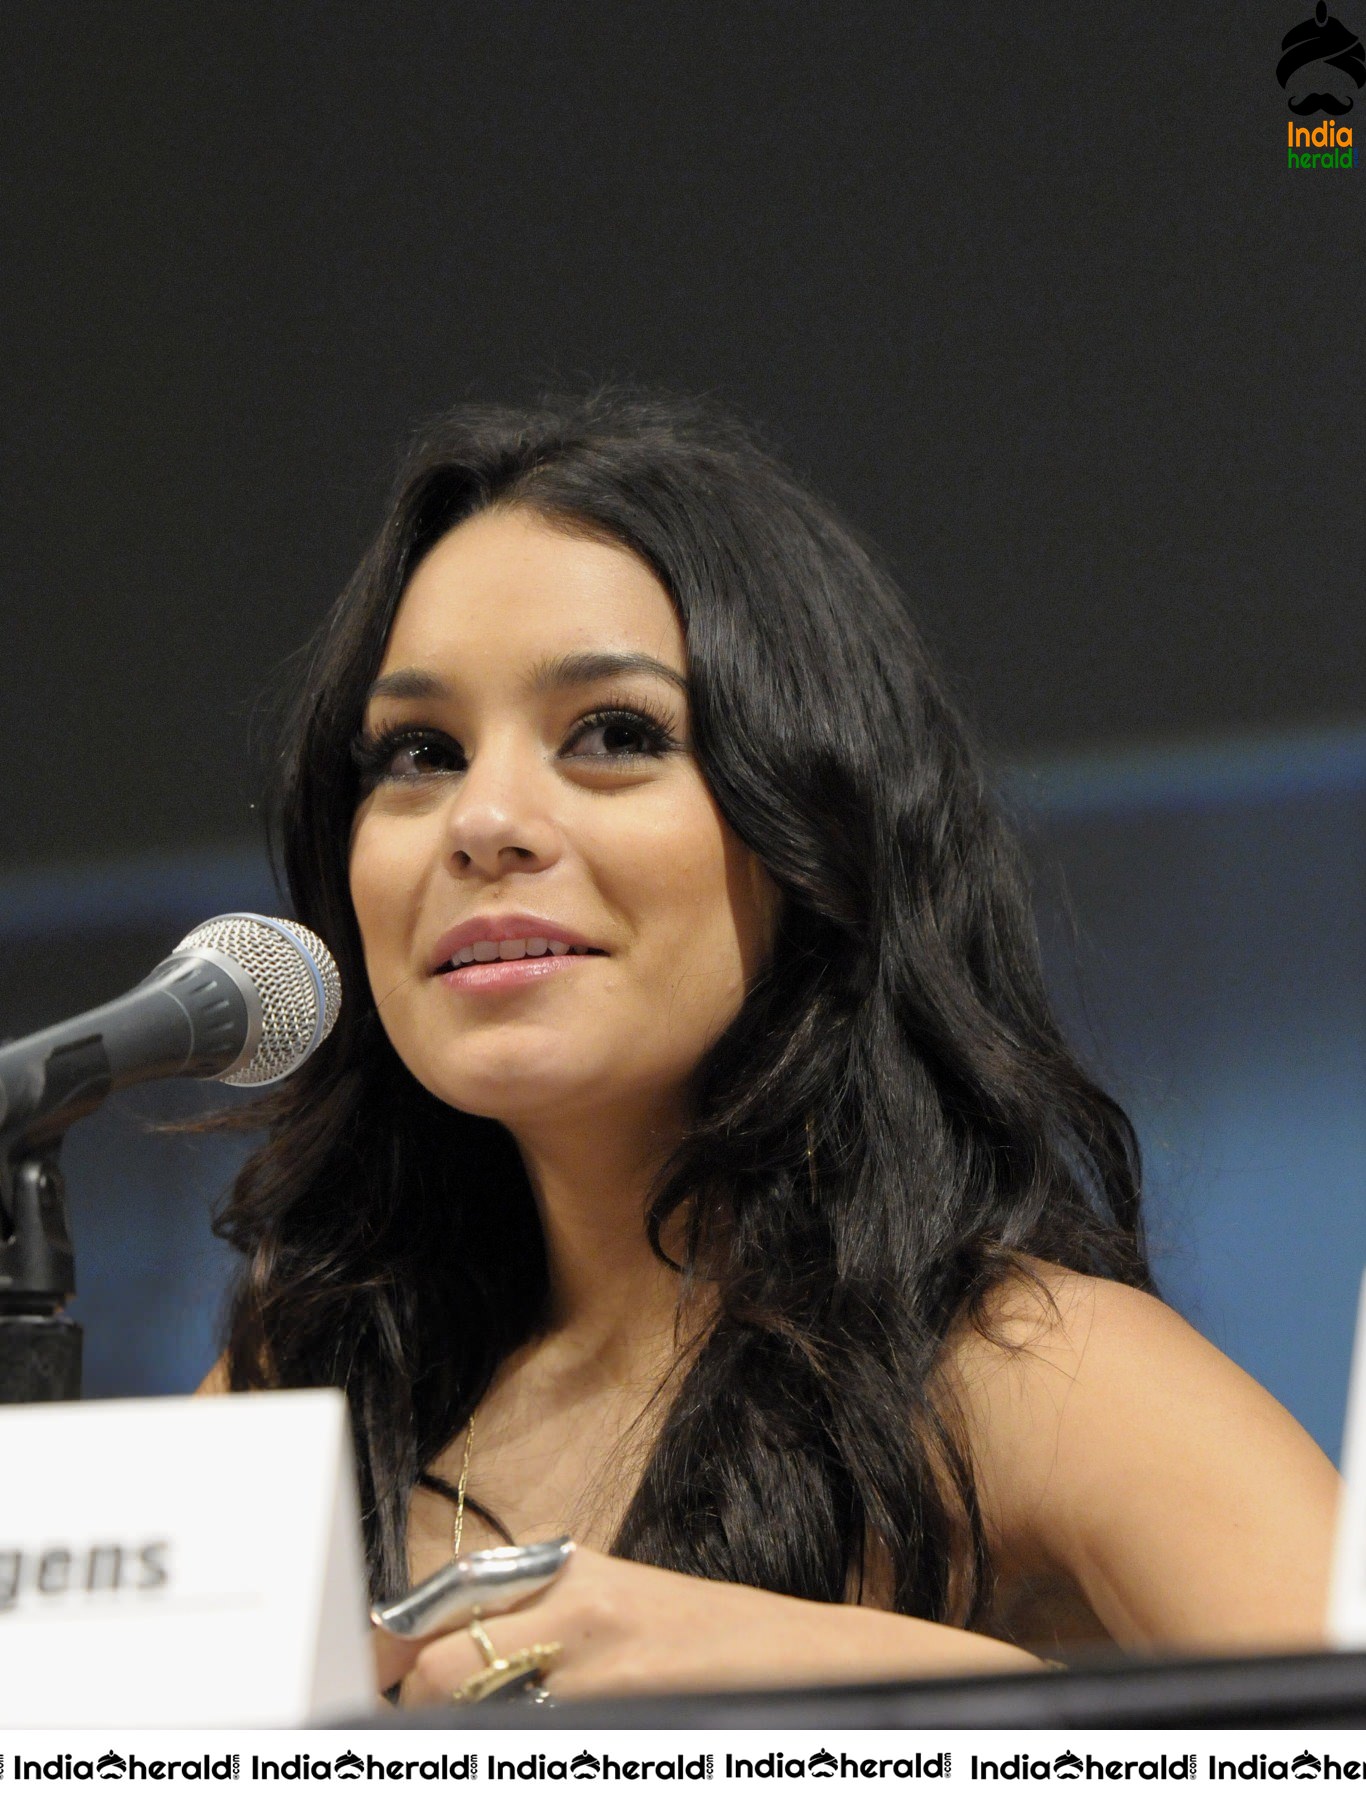 Vanessa Hudgens in a Sexy dress during Comic Con event